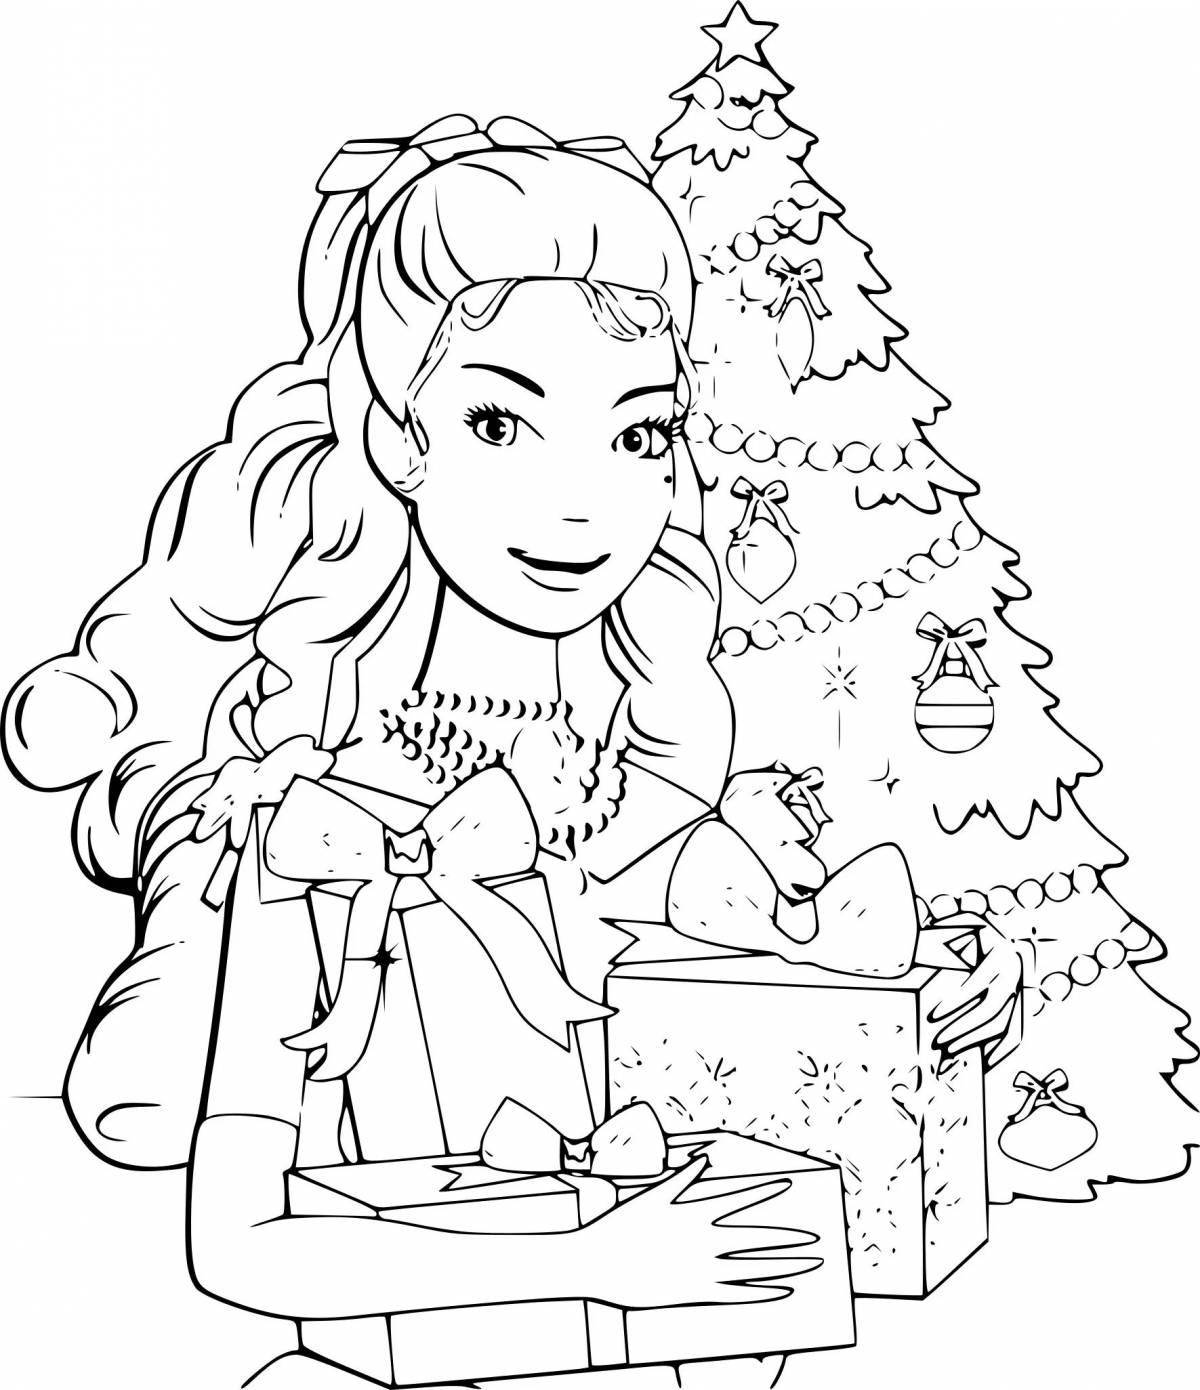 Christmas coloring book for girls 8 years old